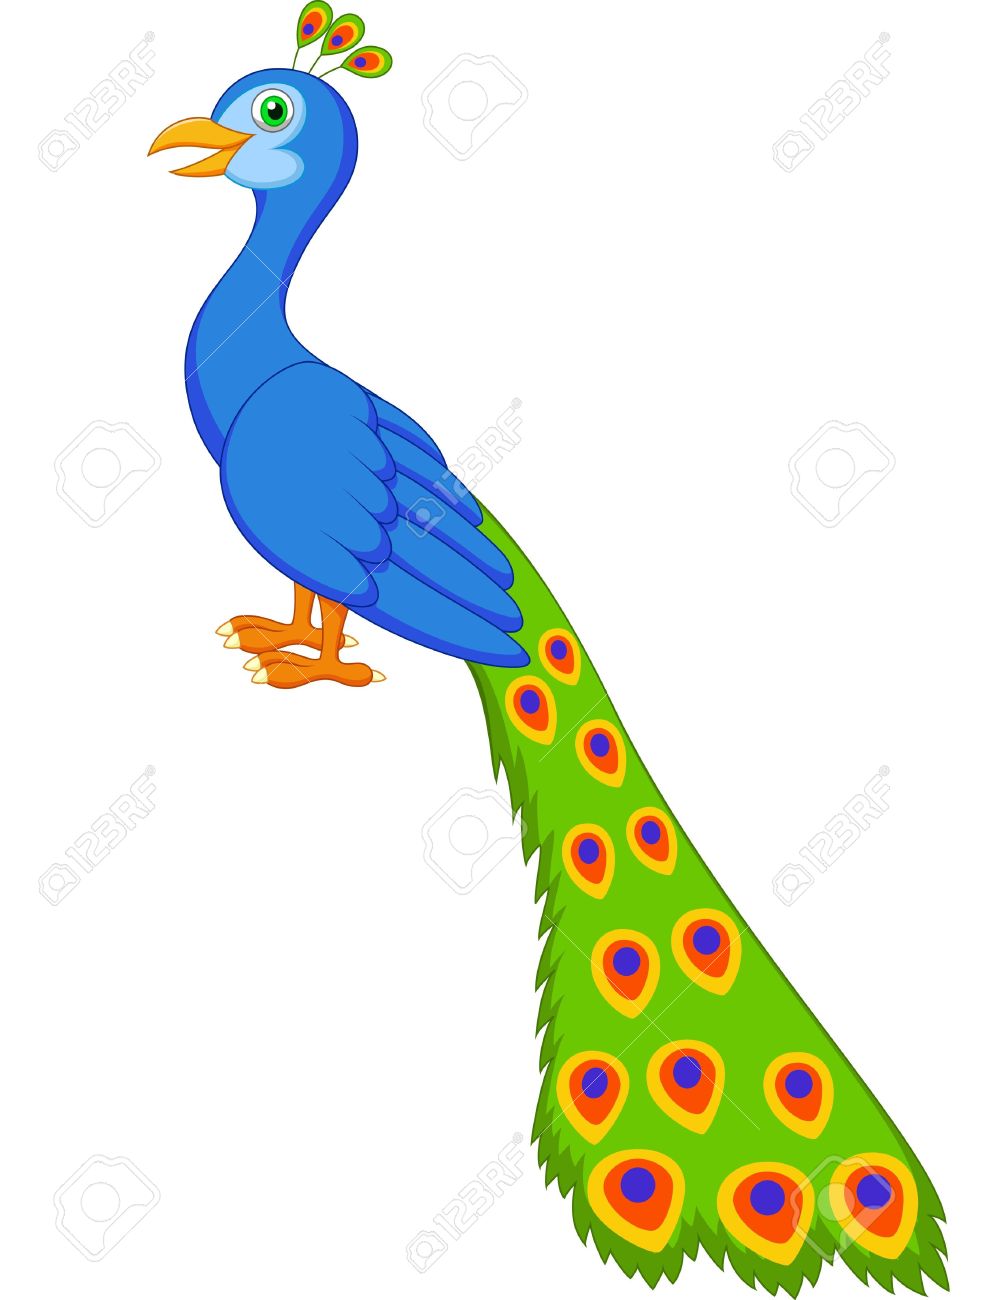 Peafowl clipart #5, Download drawings